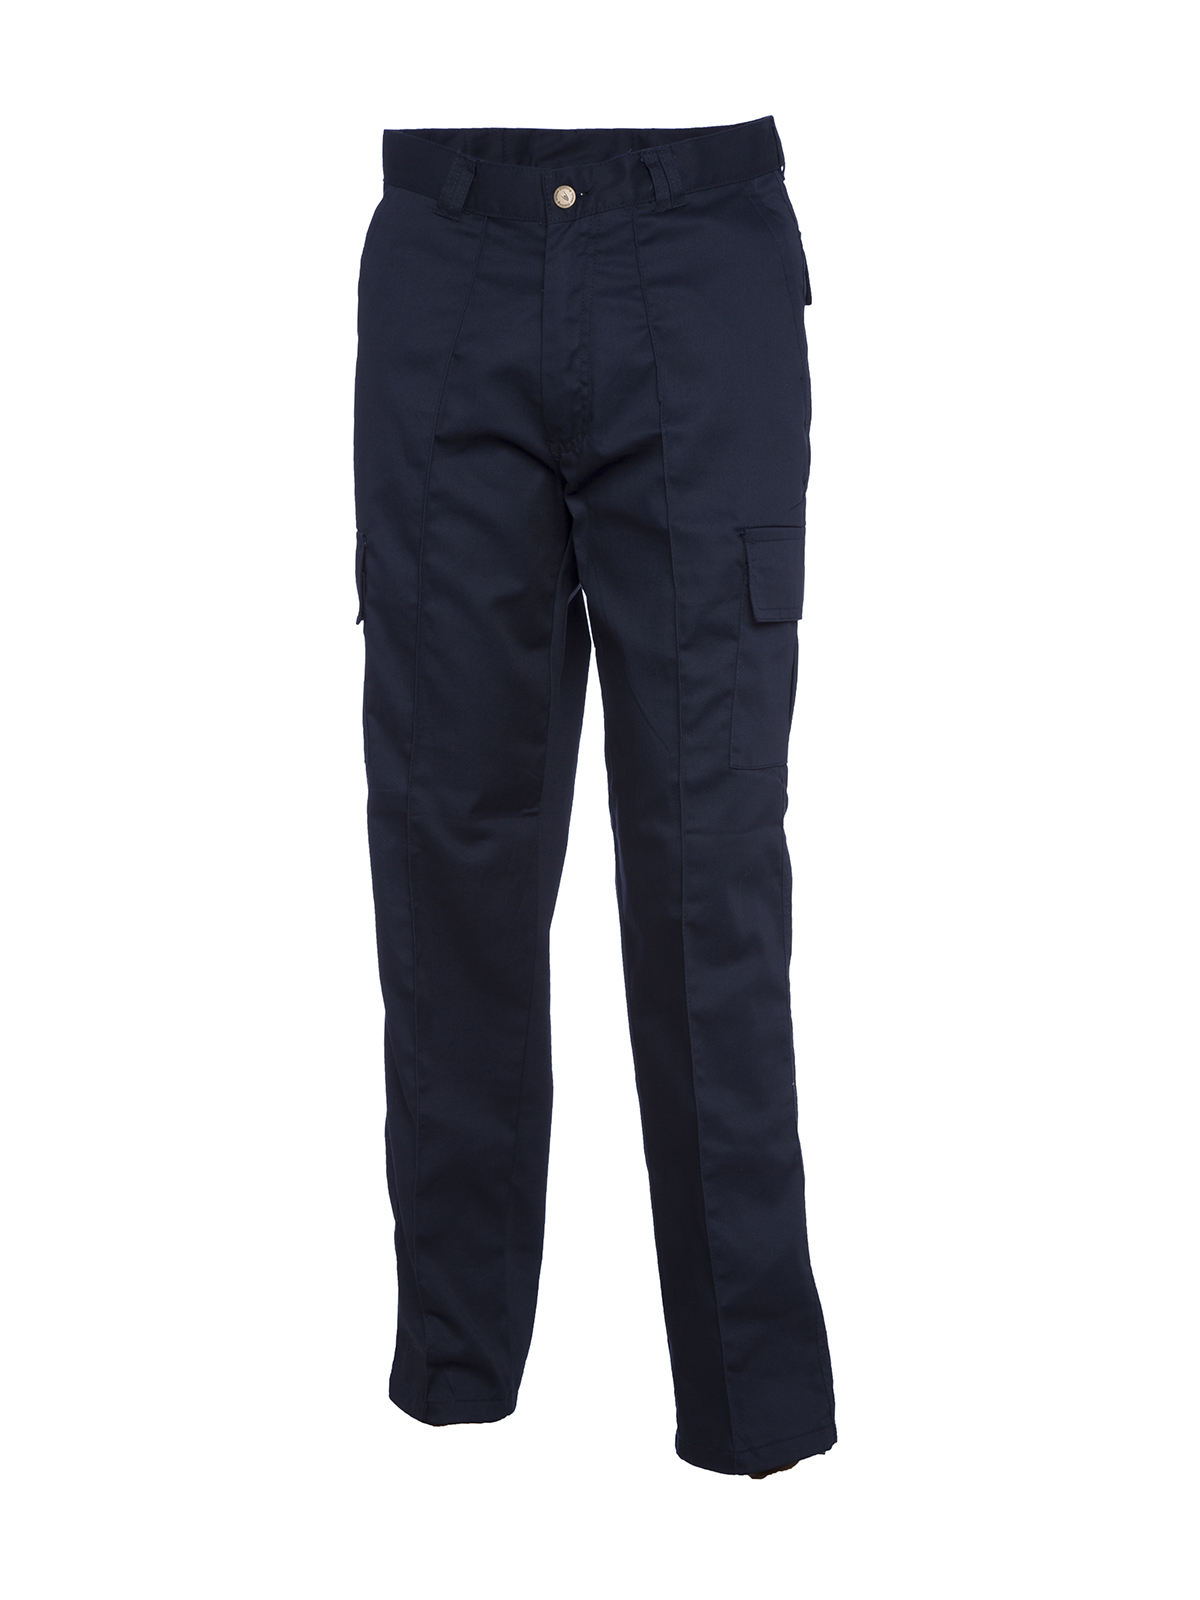 Cargo Trousers, Navy Blue - 36L